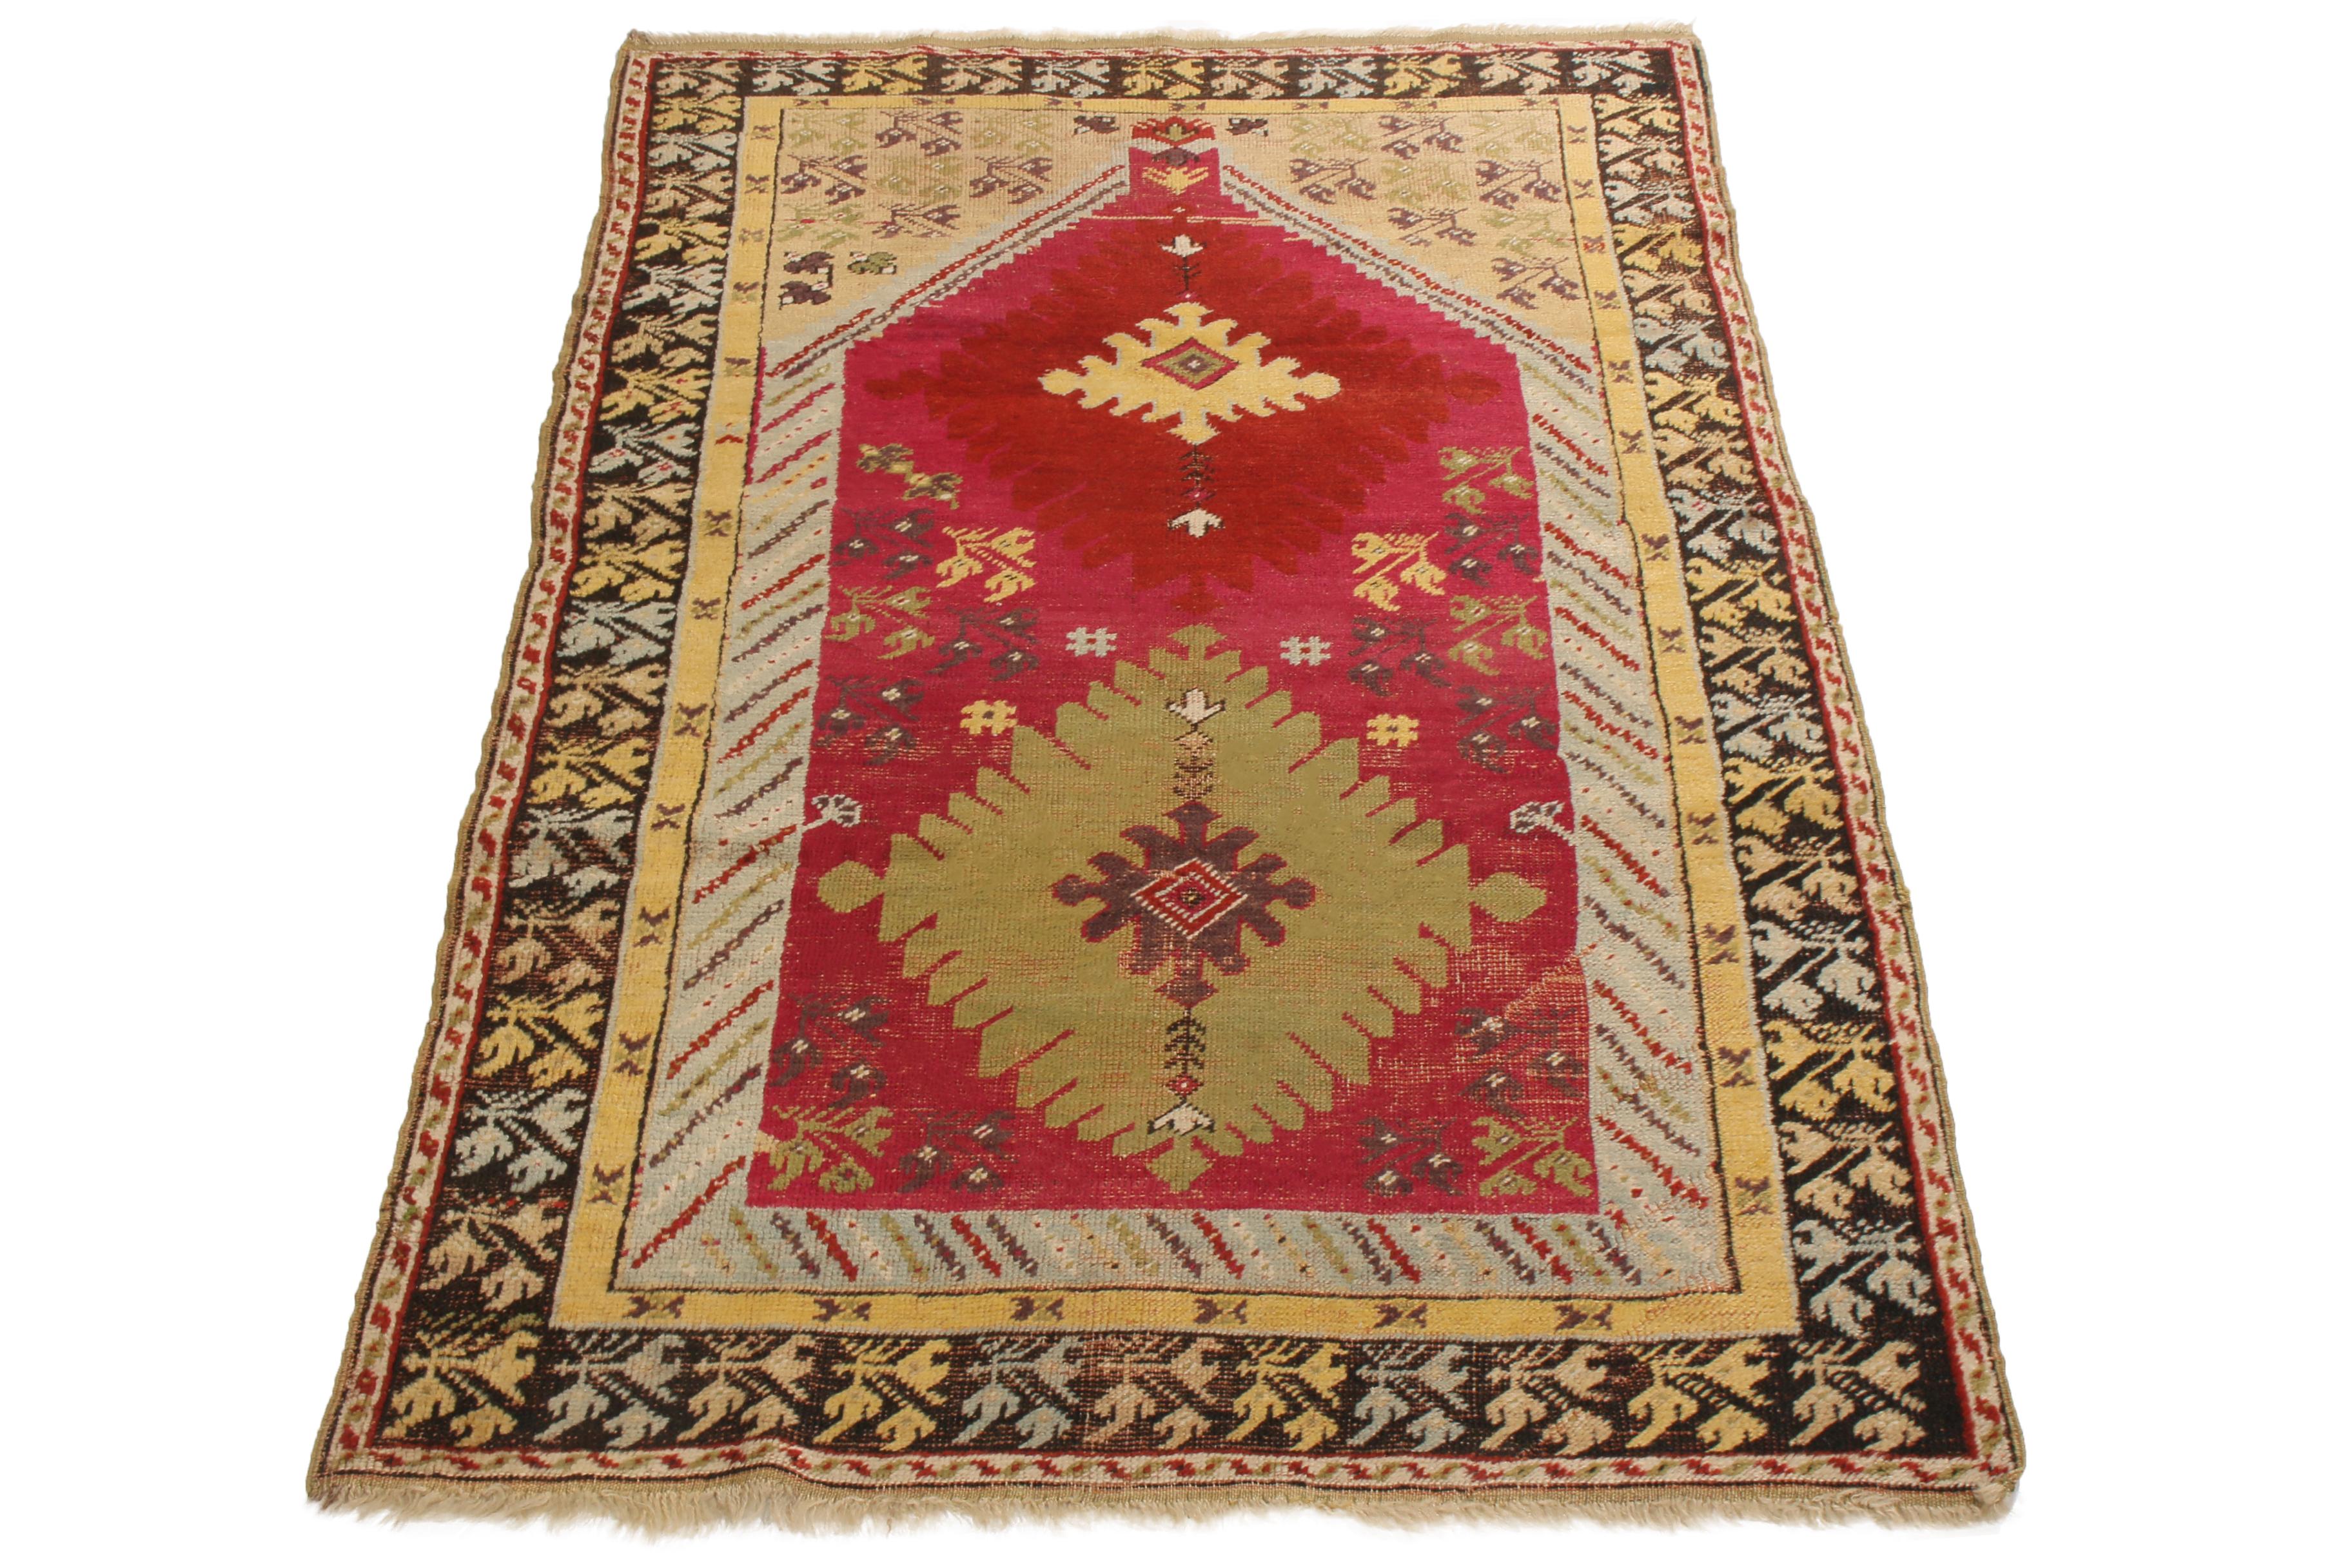 Originating from Turkey in 1890, this antique traditional Kirsehir rug emphasizes a distinguished combination of rejuvenated and protective symbols. Hand knotted in high-quality wool, at the center of the multi-tonal, textural red field Mihrab is an